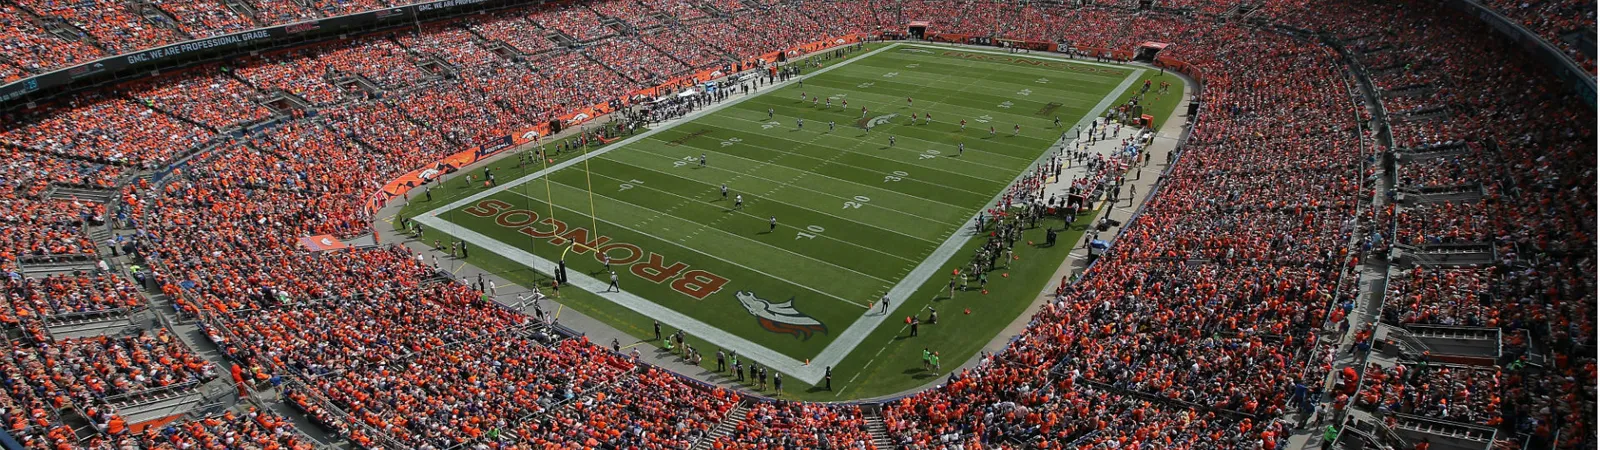 #1Top 10 NFL stadiums in the USA